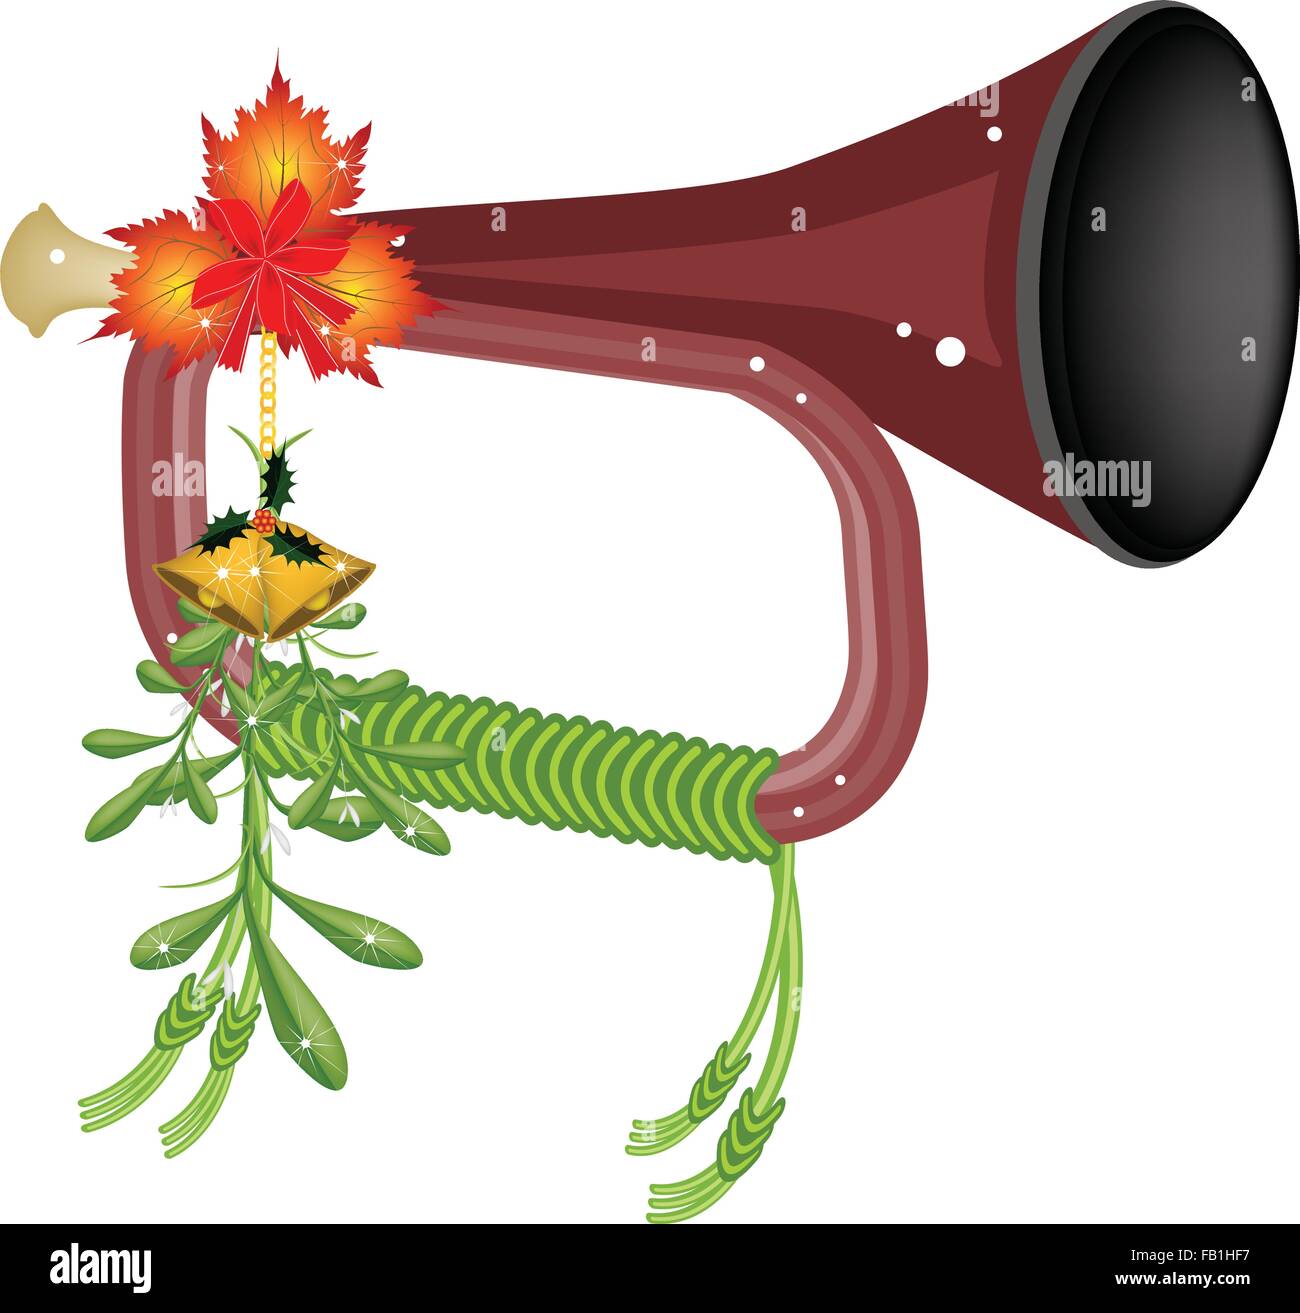 Antique Brass Bugle Decorated with Mistletoe Bunch, Red Ribbon, Maple Leaves and Golden Bell For Christmas Celebration Stock Vector